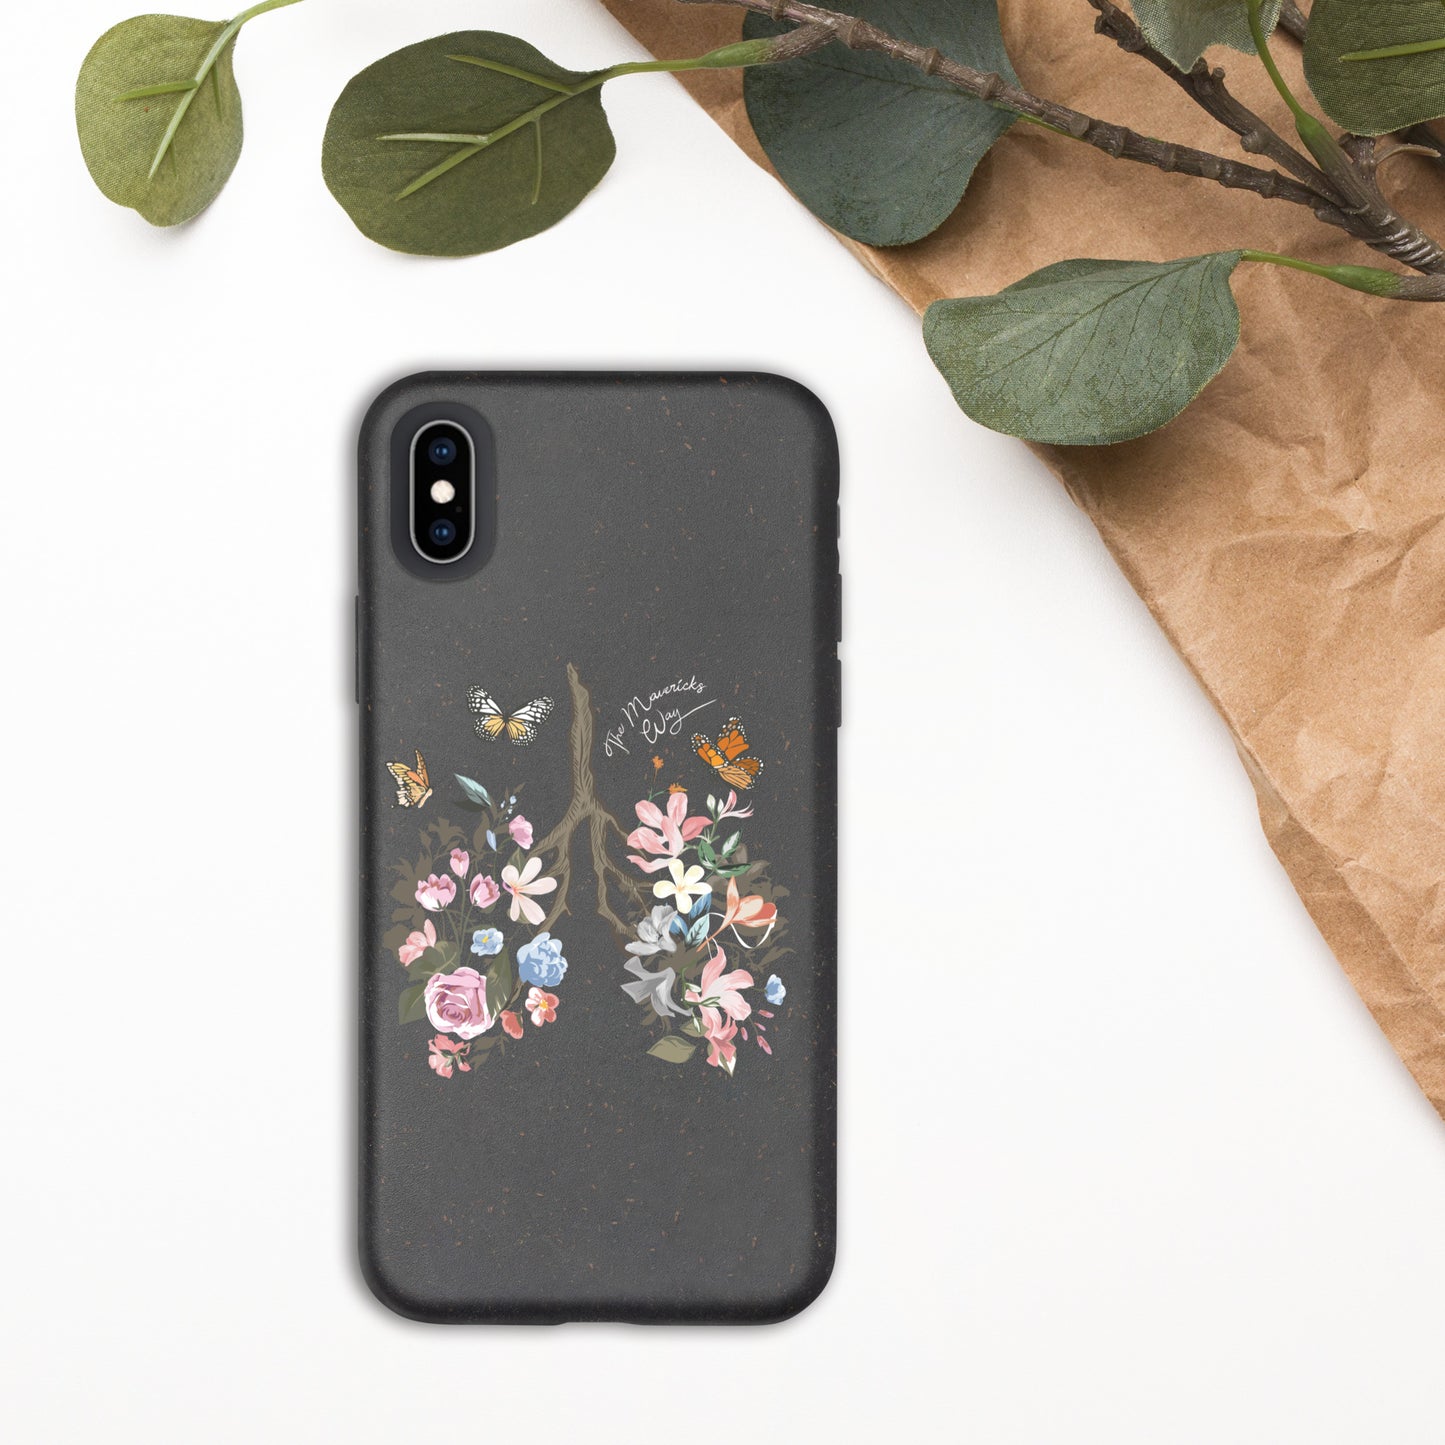 BREATHE iPhone Cover